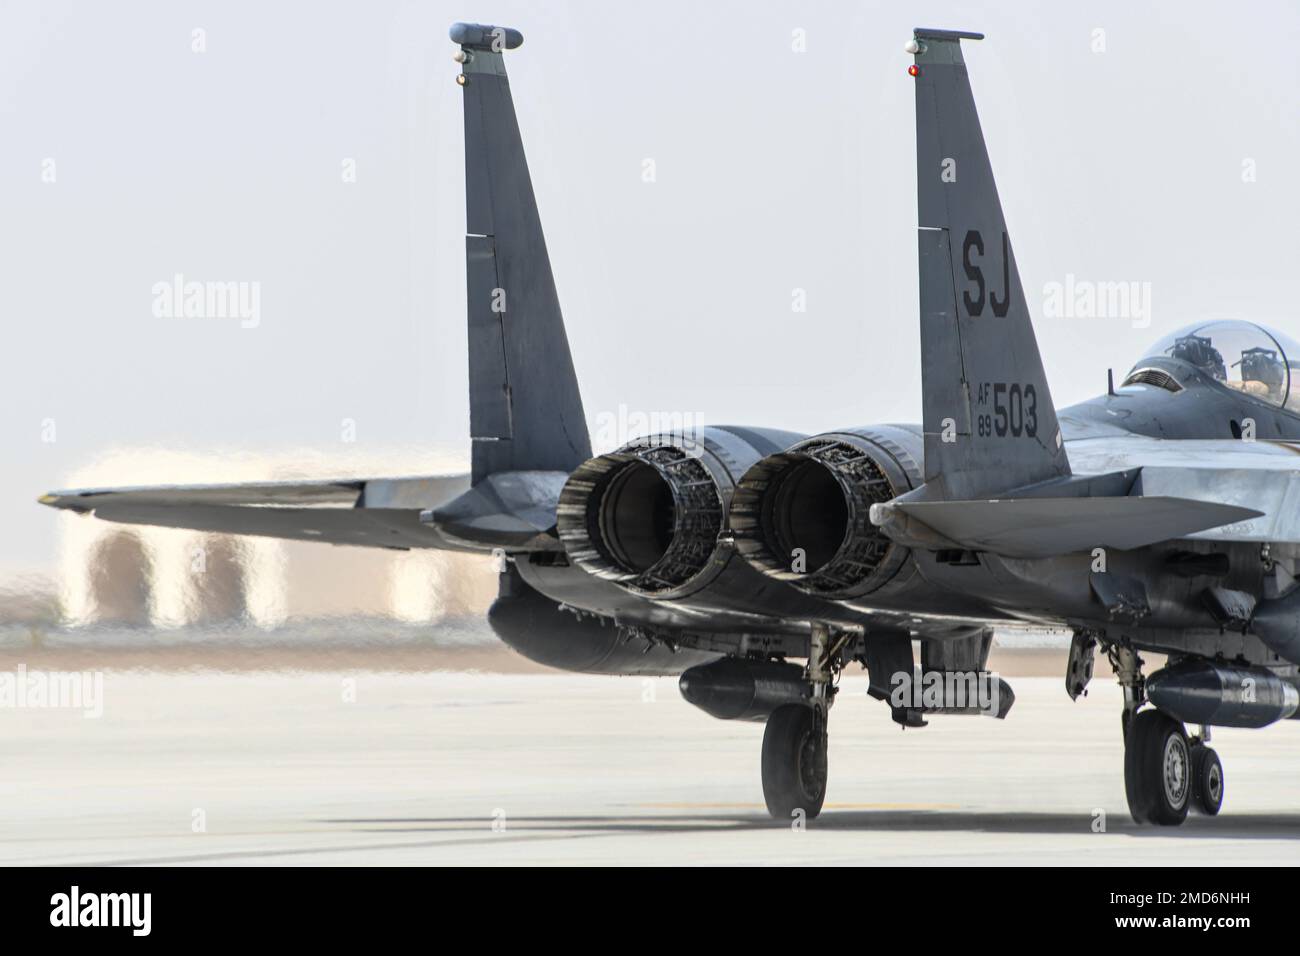 A U.S. Air Force F-15E Strike Eagle taxis to the runway during Agile Combat Employment exercise “Agile Tuskegee” July 12, 2022, at Al Dhafra Air Base, United Arab Emirates. The F-15E can generate 25,000-29,000 pounds of thrust per engine and reach speeds 1,875 mph — Mach 2.5 plus. Stock Photo